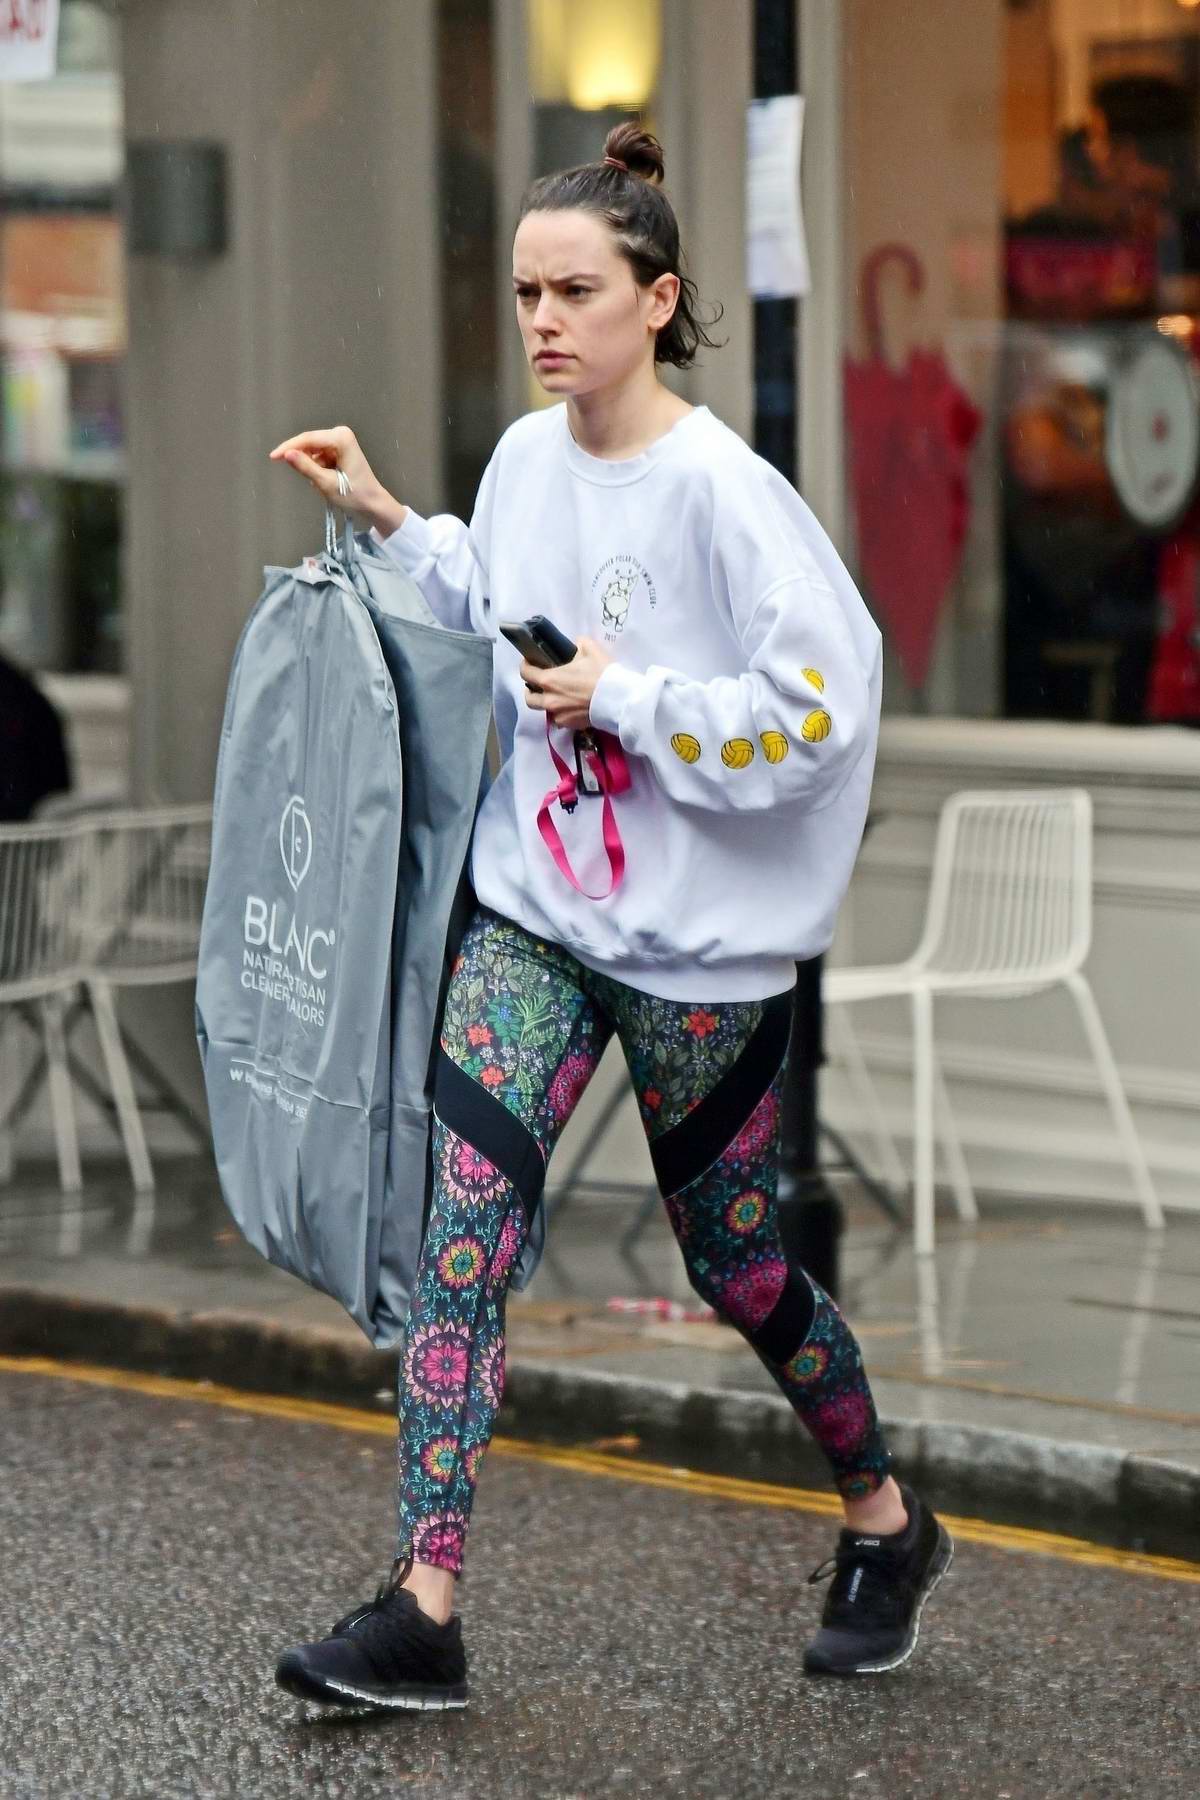 https://www.celebsfirst.com/wp-content/uploads/2019/10/daisy-ridley-wears-a-white-sweatshirt-and-colorful-leggings-while-picking-up-some-dry-cleaning-in-london-uk-241019_6.jpg